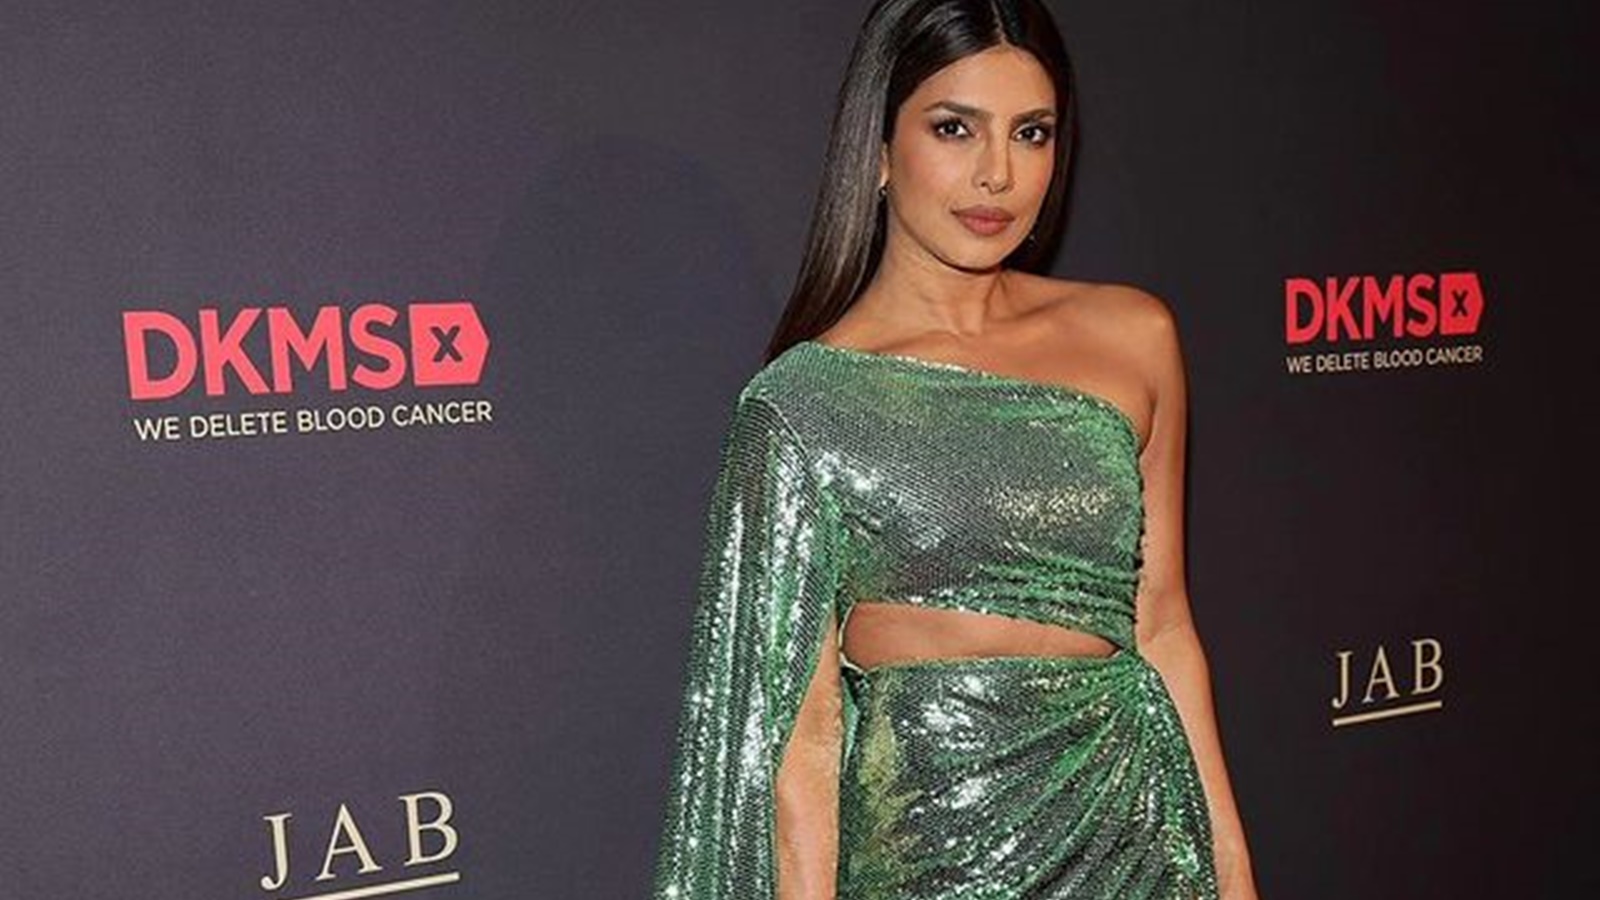 Priyanka Chopra Sexy Chudai Hd Video - Priyanka Chopra's latest photos from DKMS Gala 2023 show her at shimmery  best, fan calls her 'most beautiful woman in the world' | Bollywood News -  The Indian Express